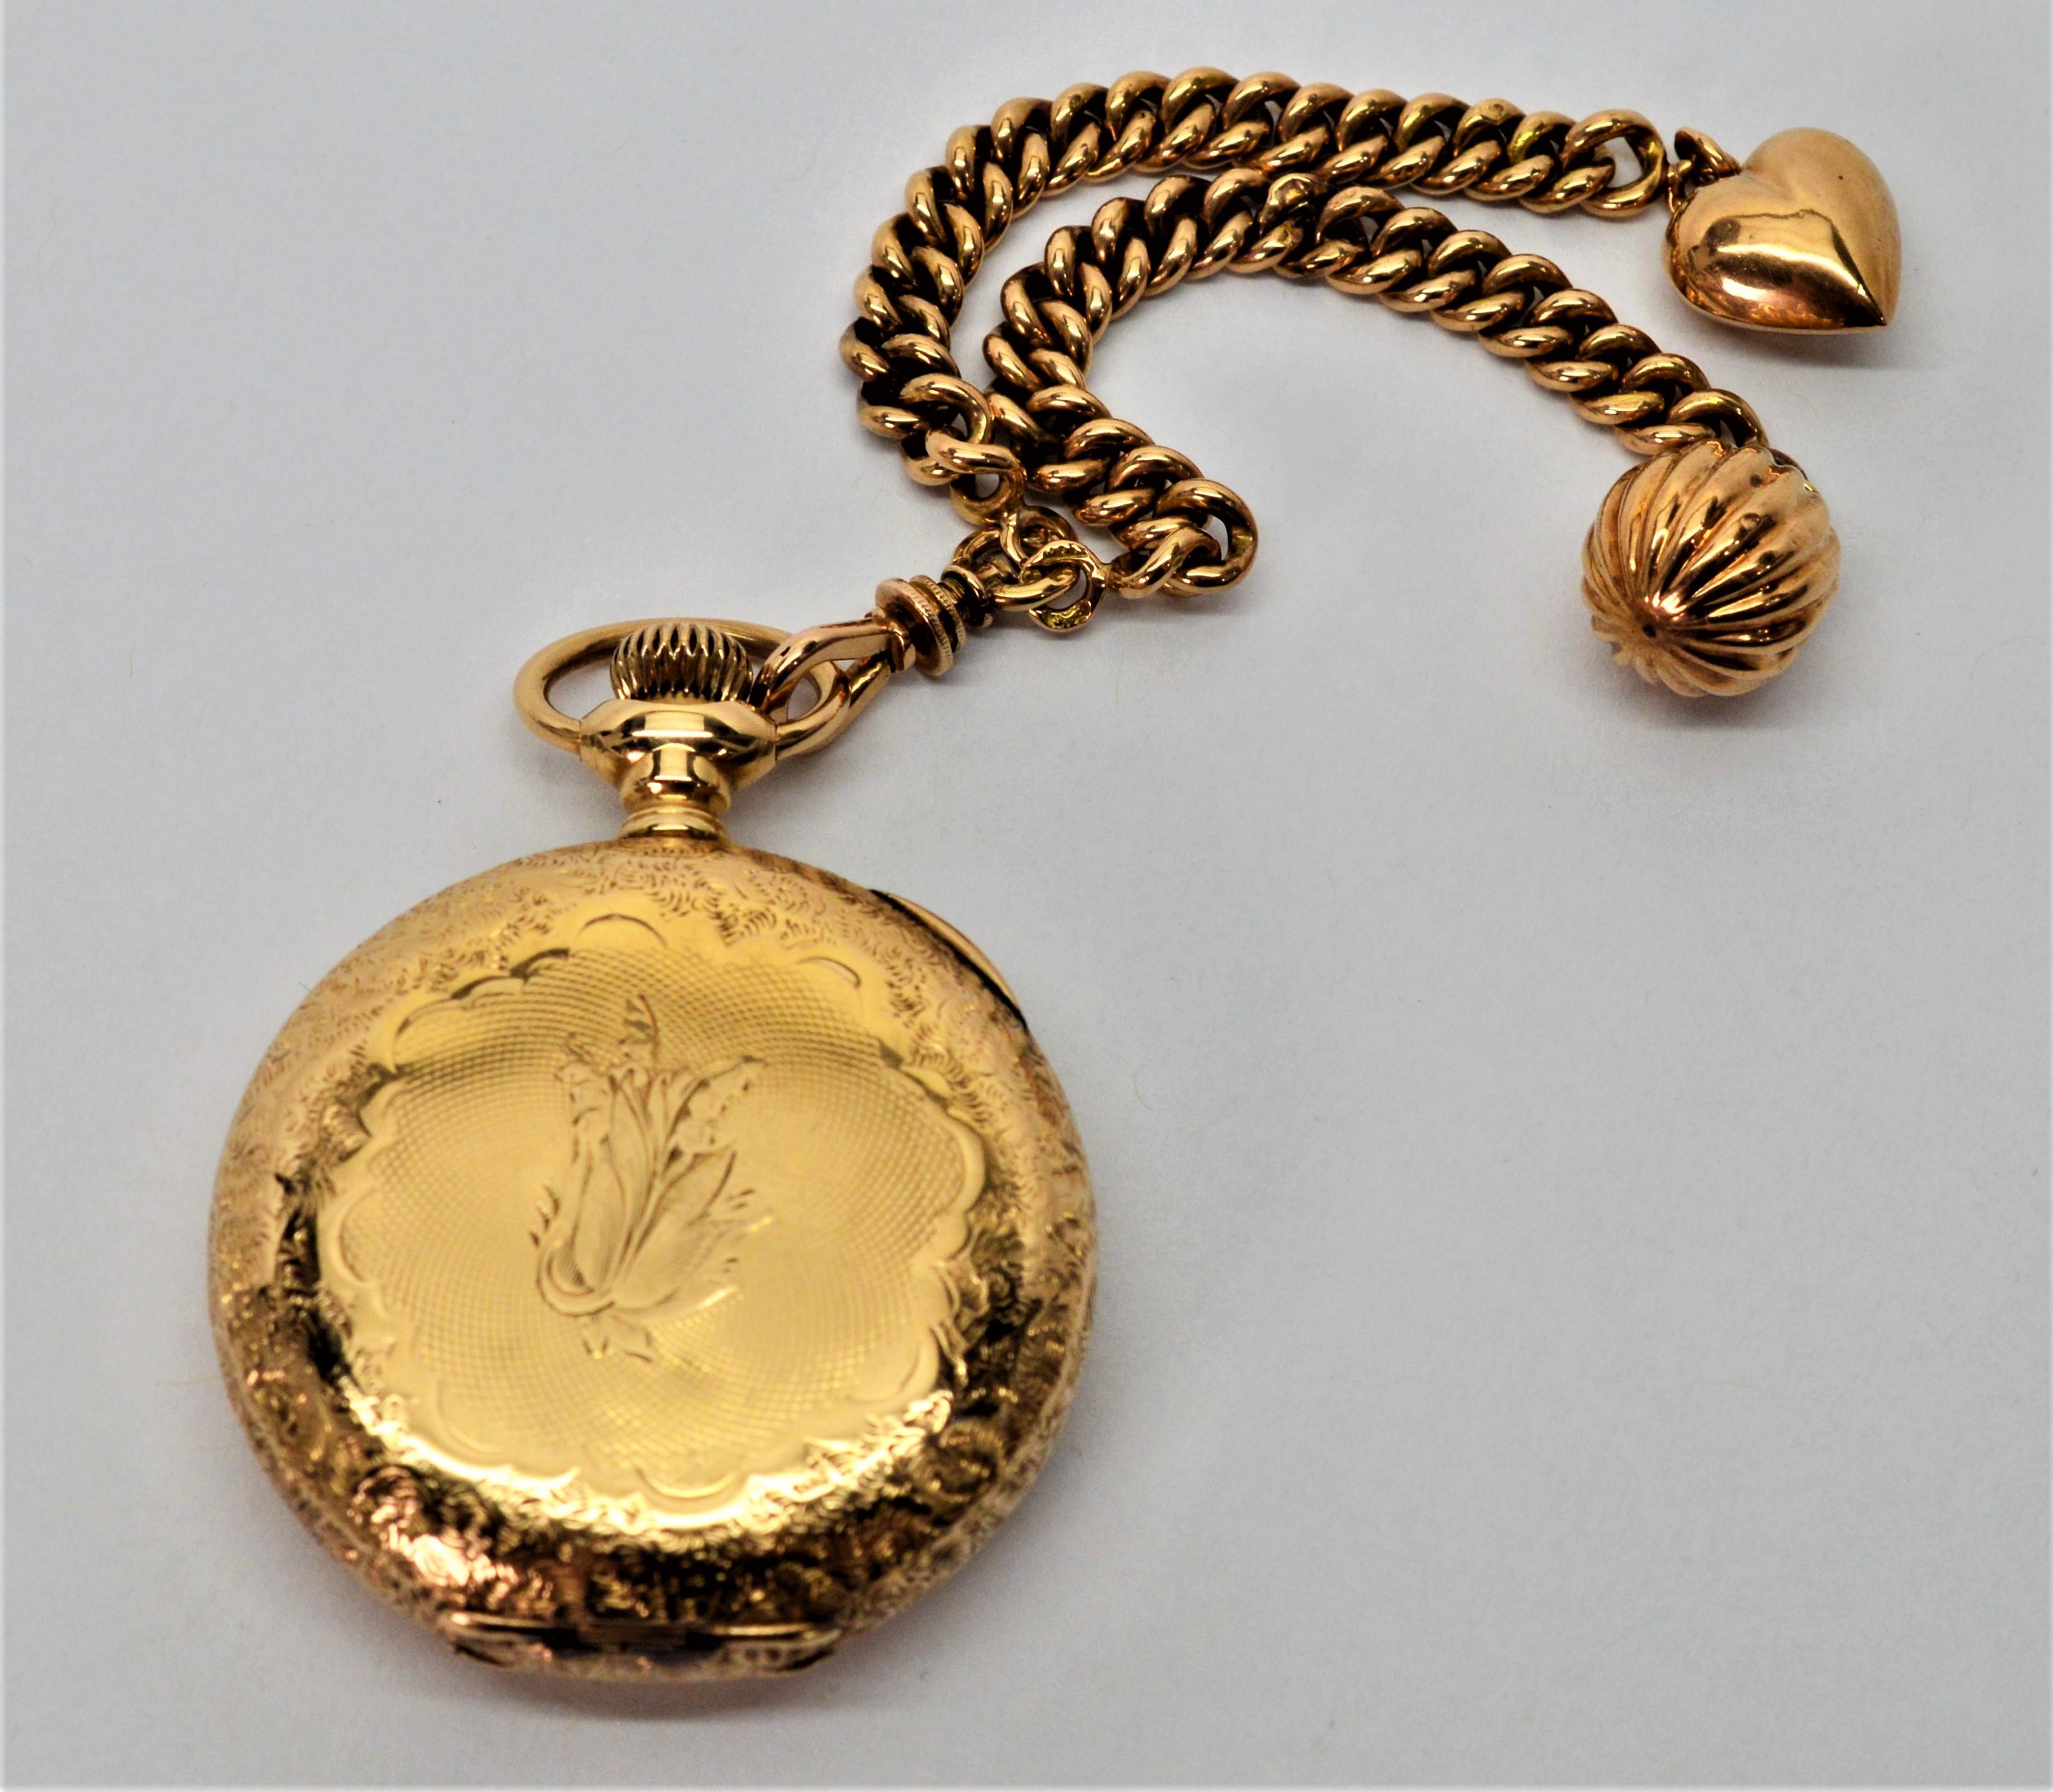 Waltham American Riverside Pocket Watch with Fob and Charms For Sale 2